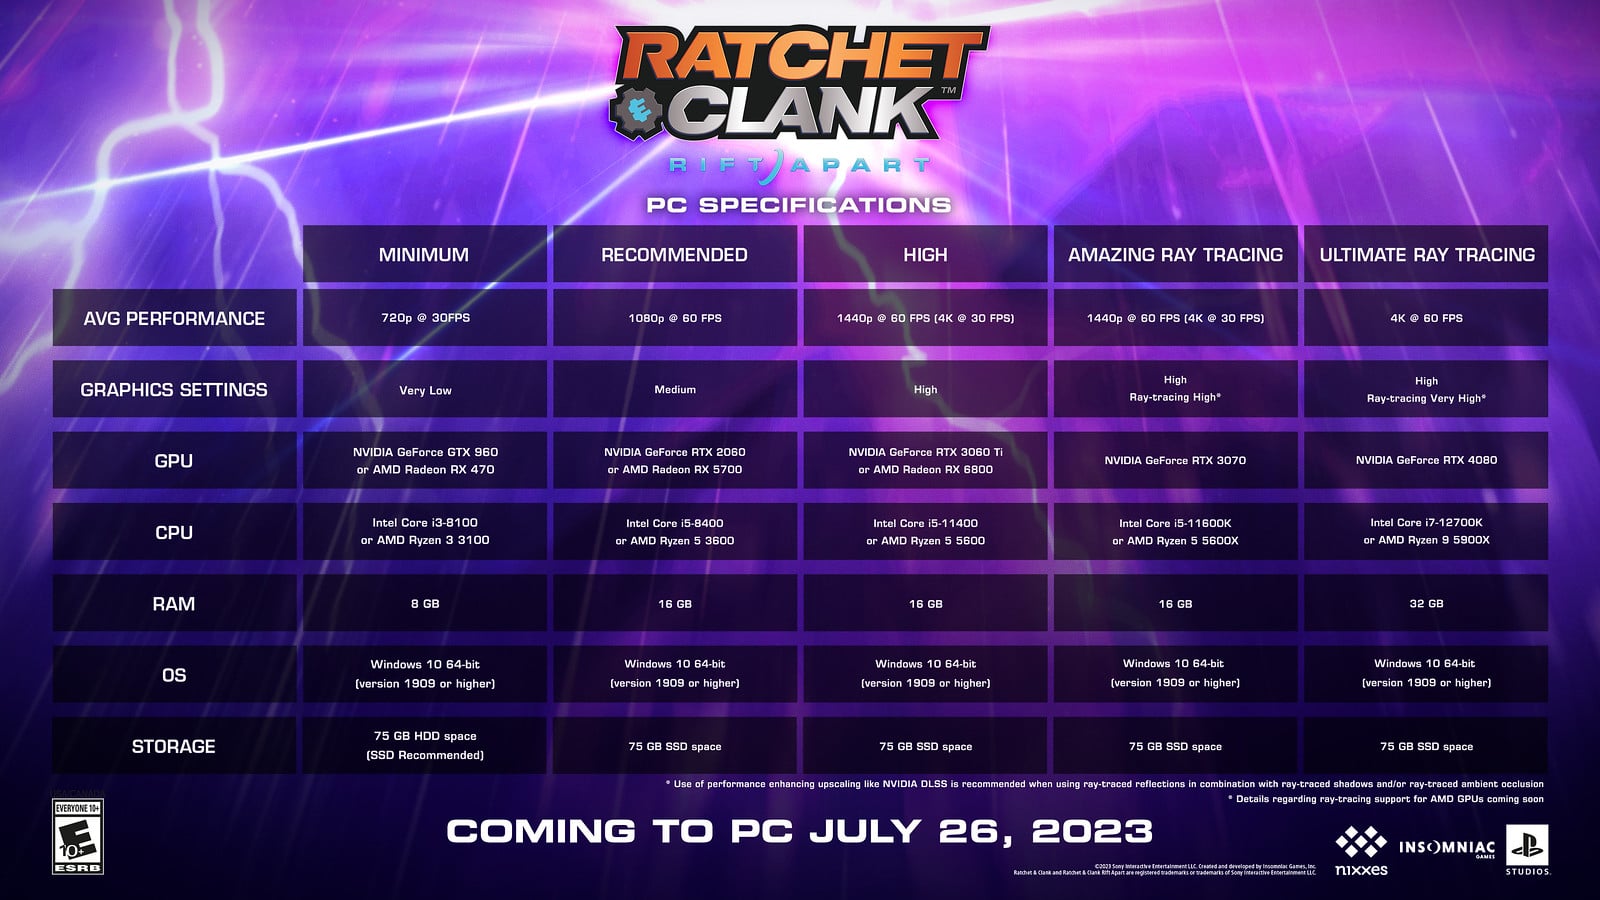 RAtchet and Clank PC Requirements